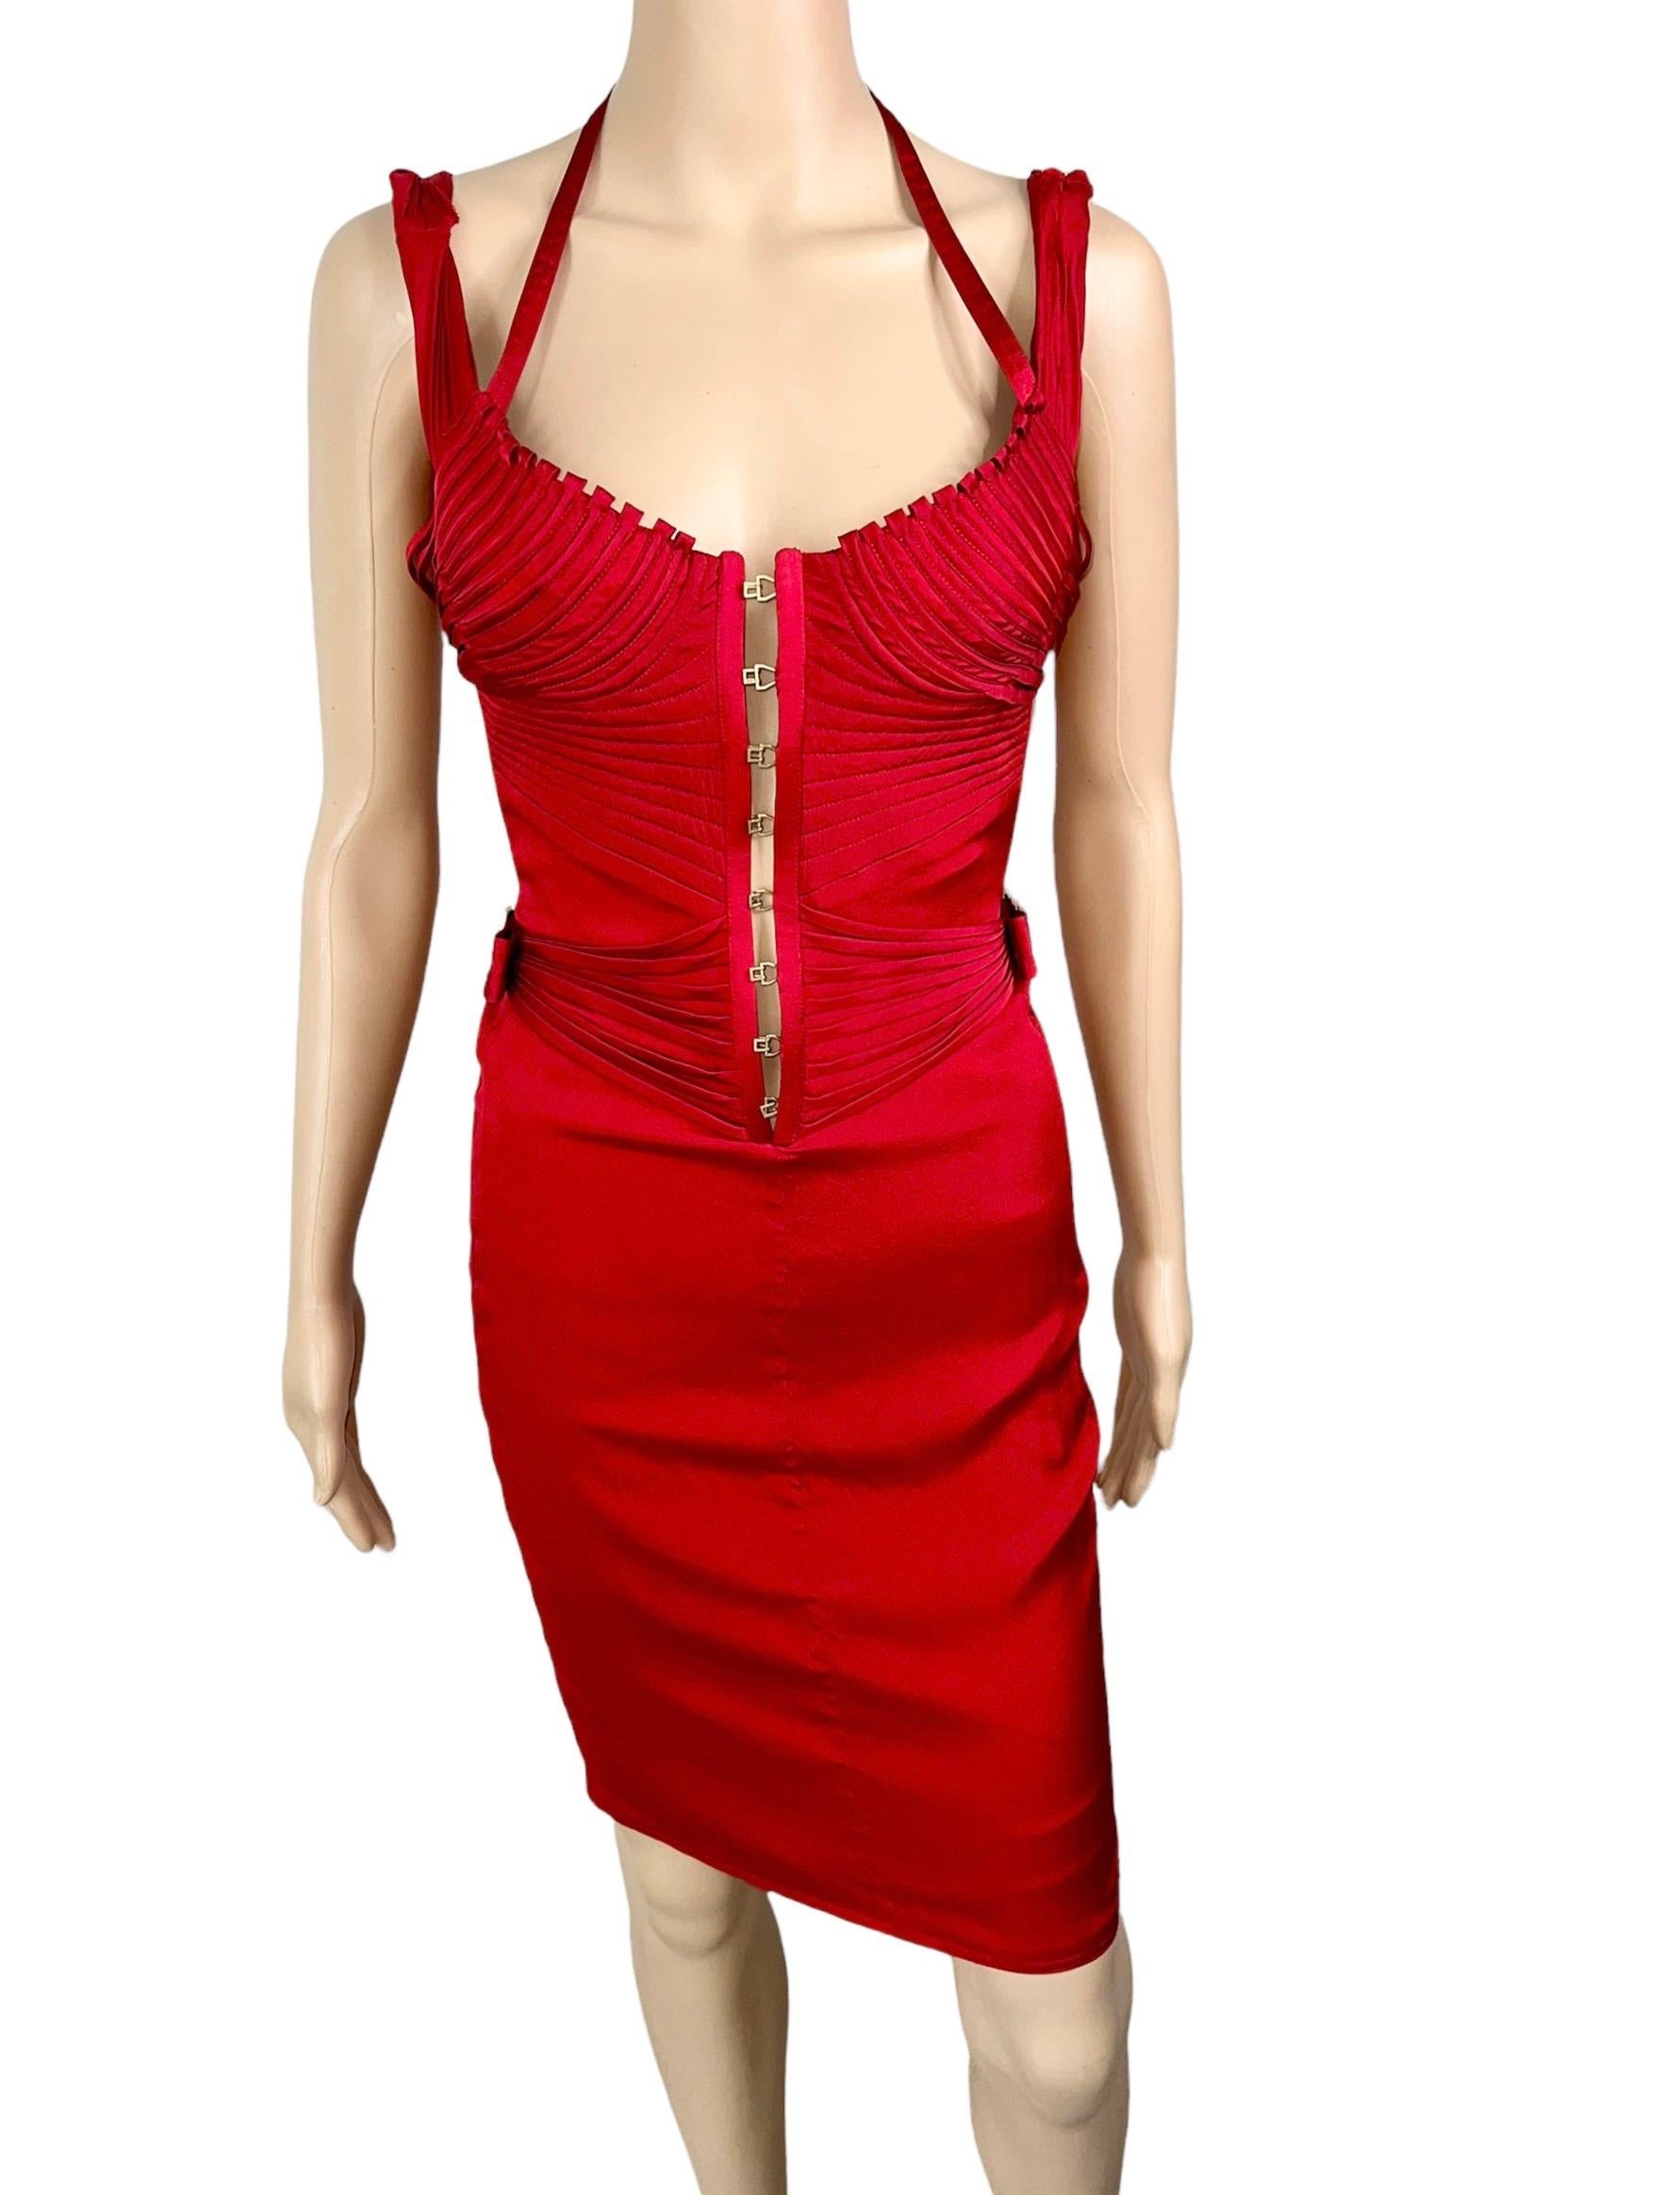 Gray Tom Ford for Gucci F/W 2003 Runway Bustier Corset Silk Red Dress For Sale